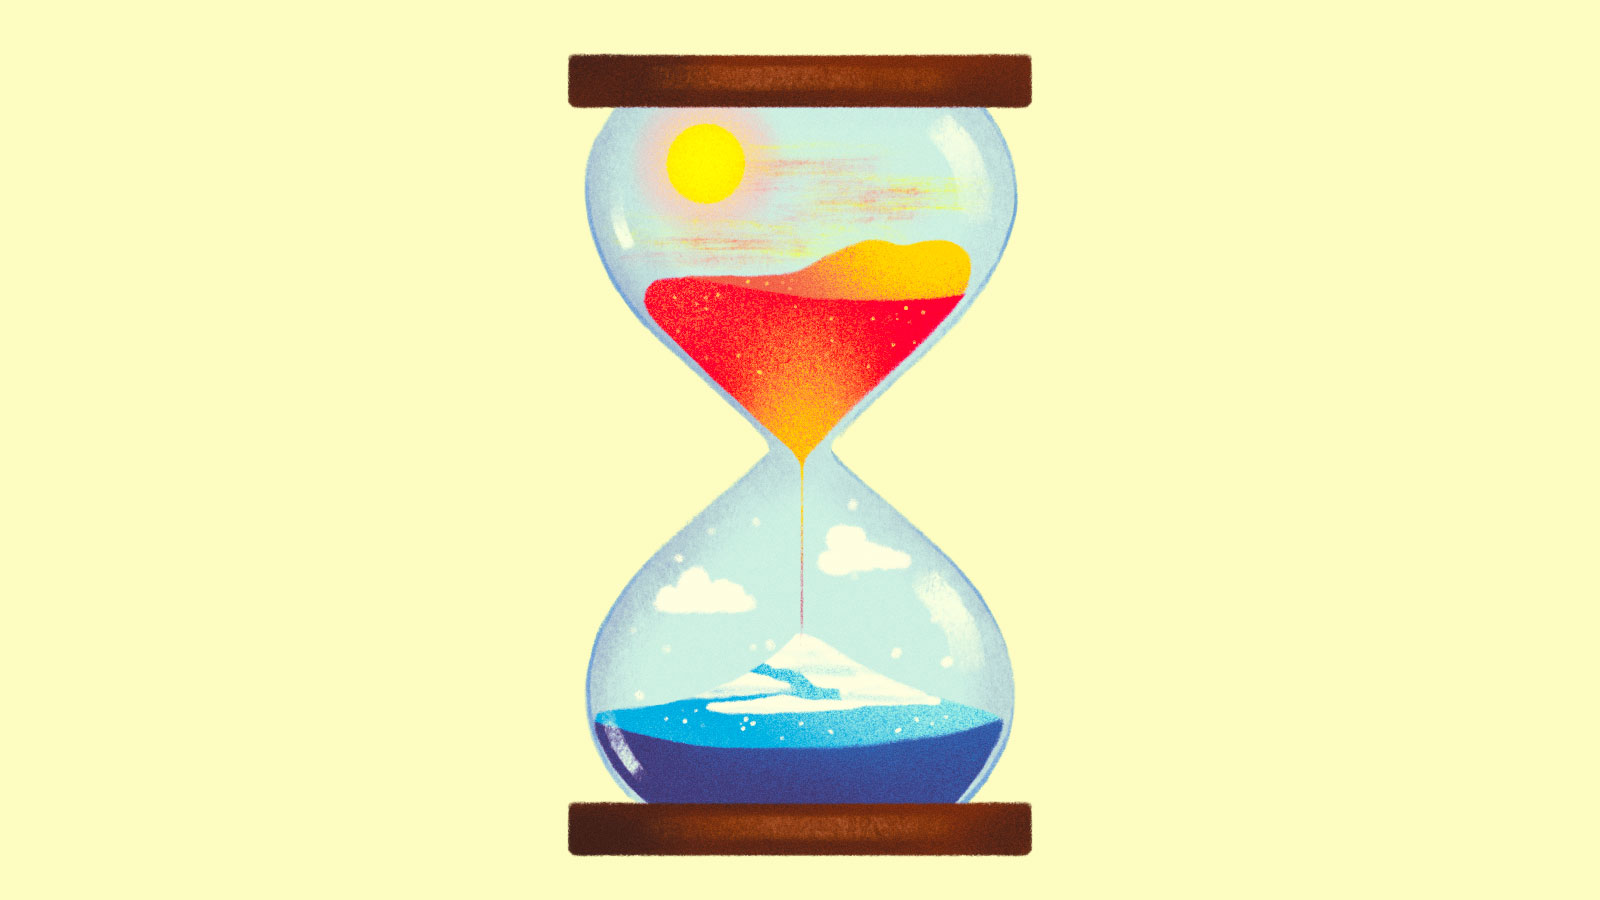 Illustration of an hourglass with sun and red sand on top; snow and blue sand on bottom